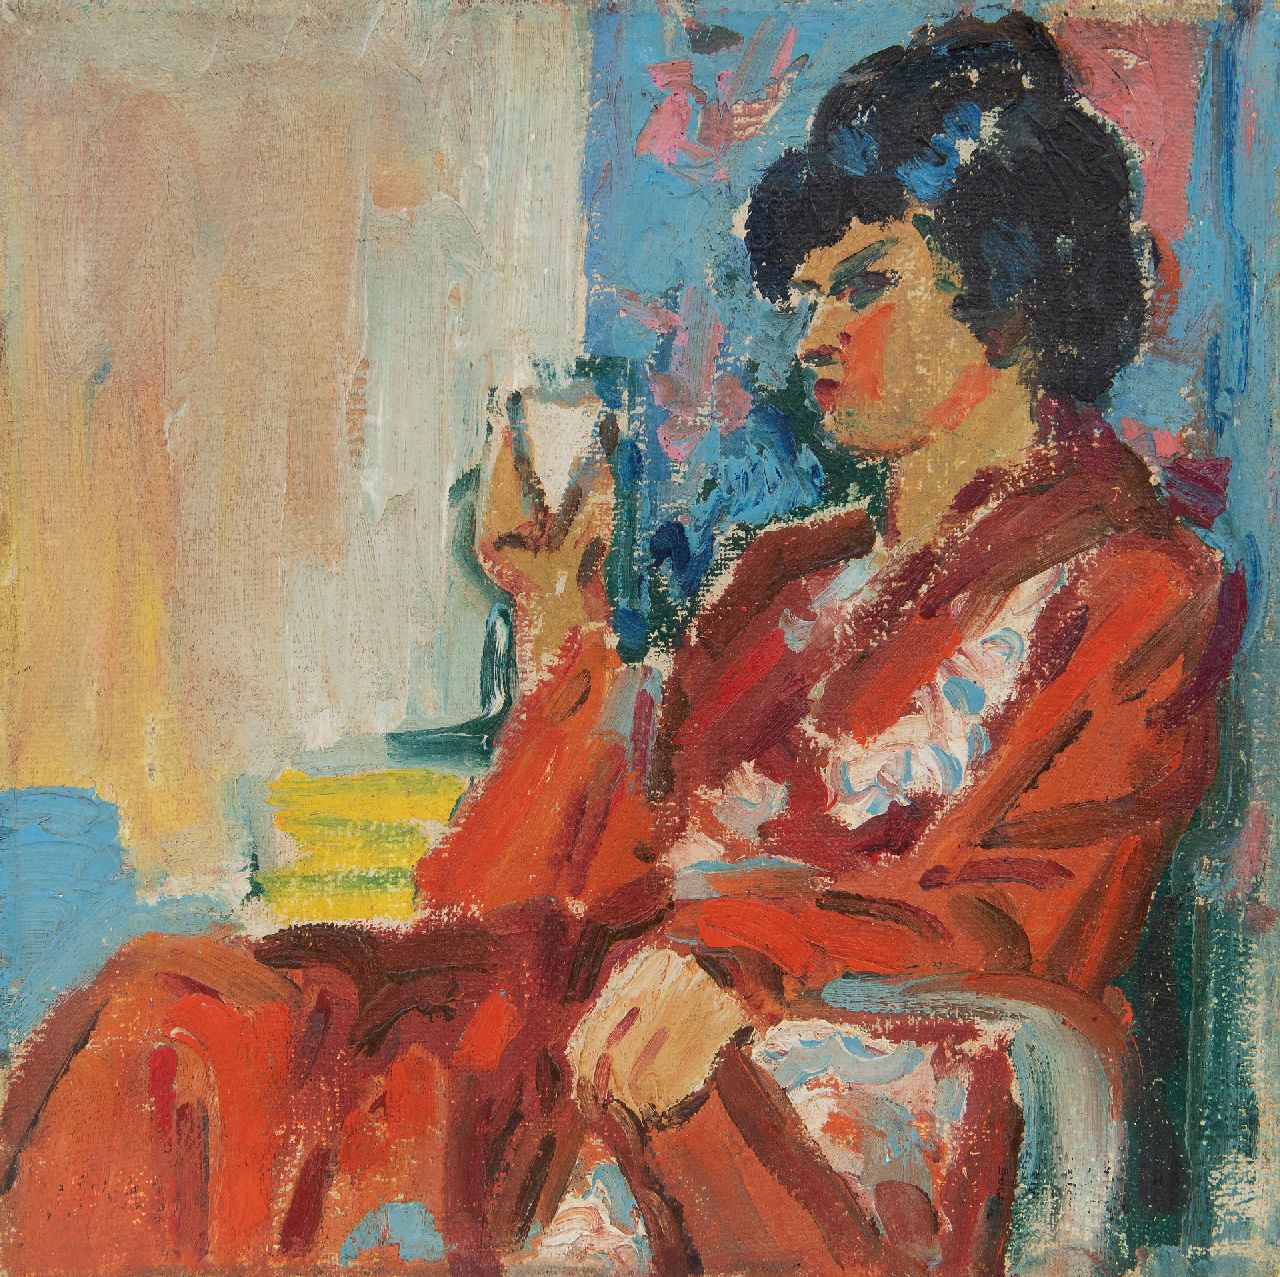 Dijkstra J.  | Johannes 'Johan' Dijkstra | Paintings offered for sale | Elegant lady resting in a chair, wax paint on canvas 25.2 x 25.2 cm, eind jaren '20